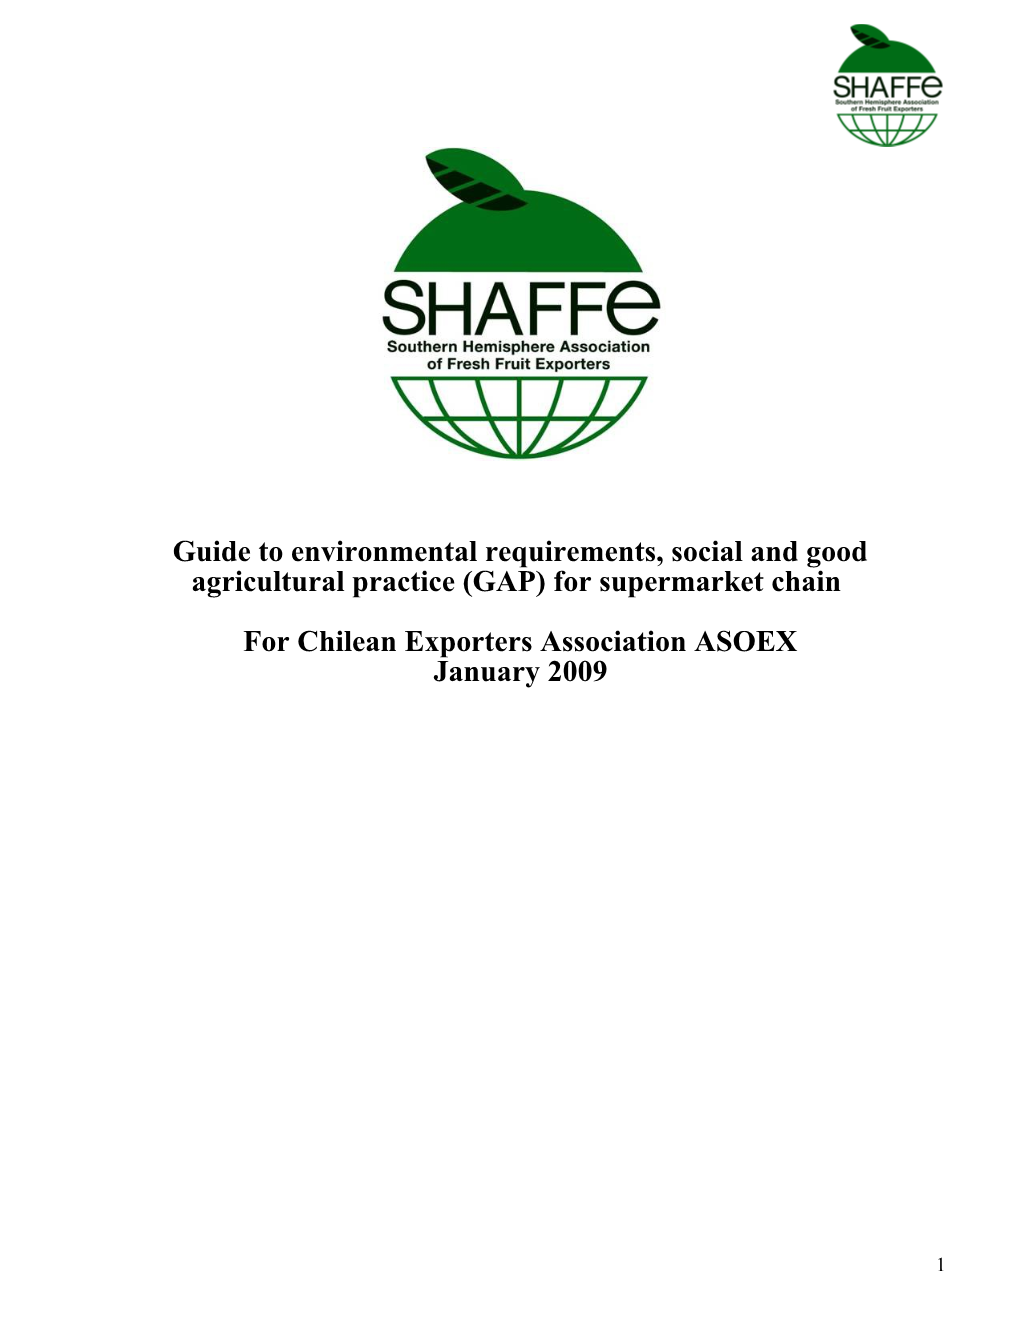 For Chilean Exporters Association ASOEX